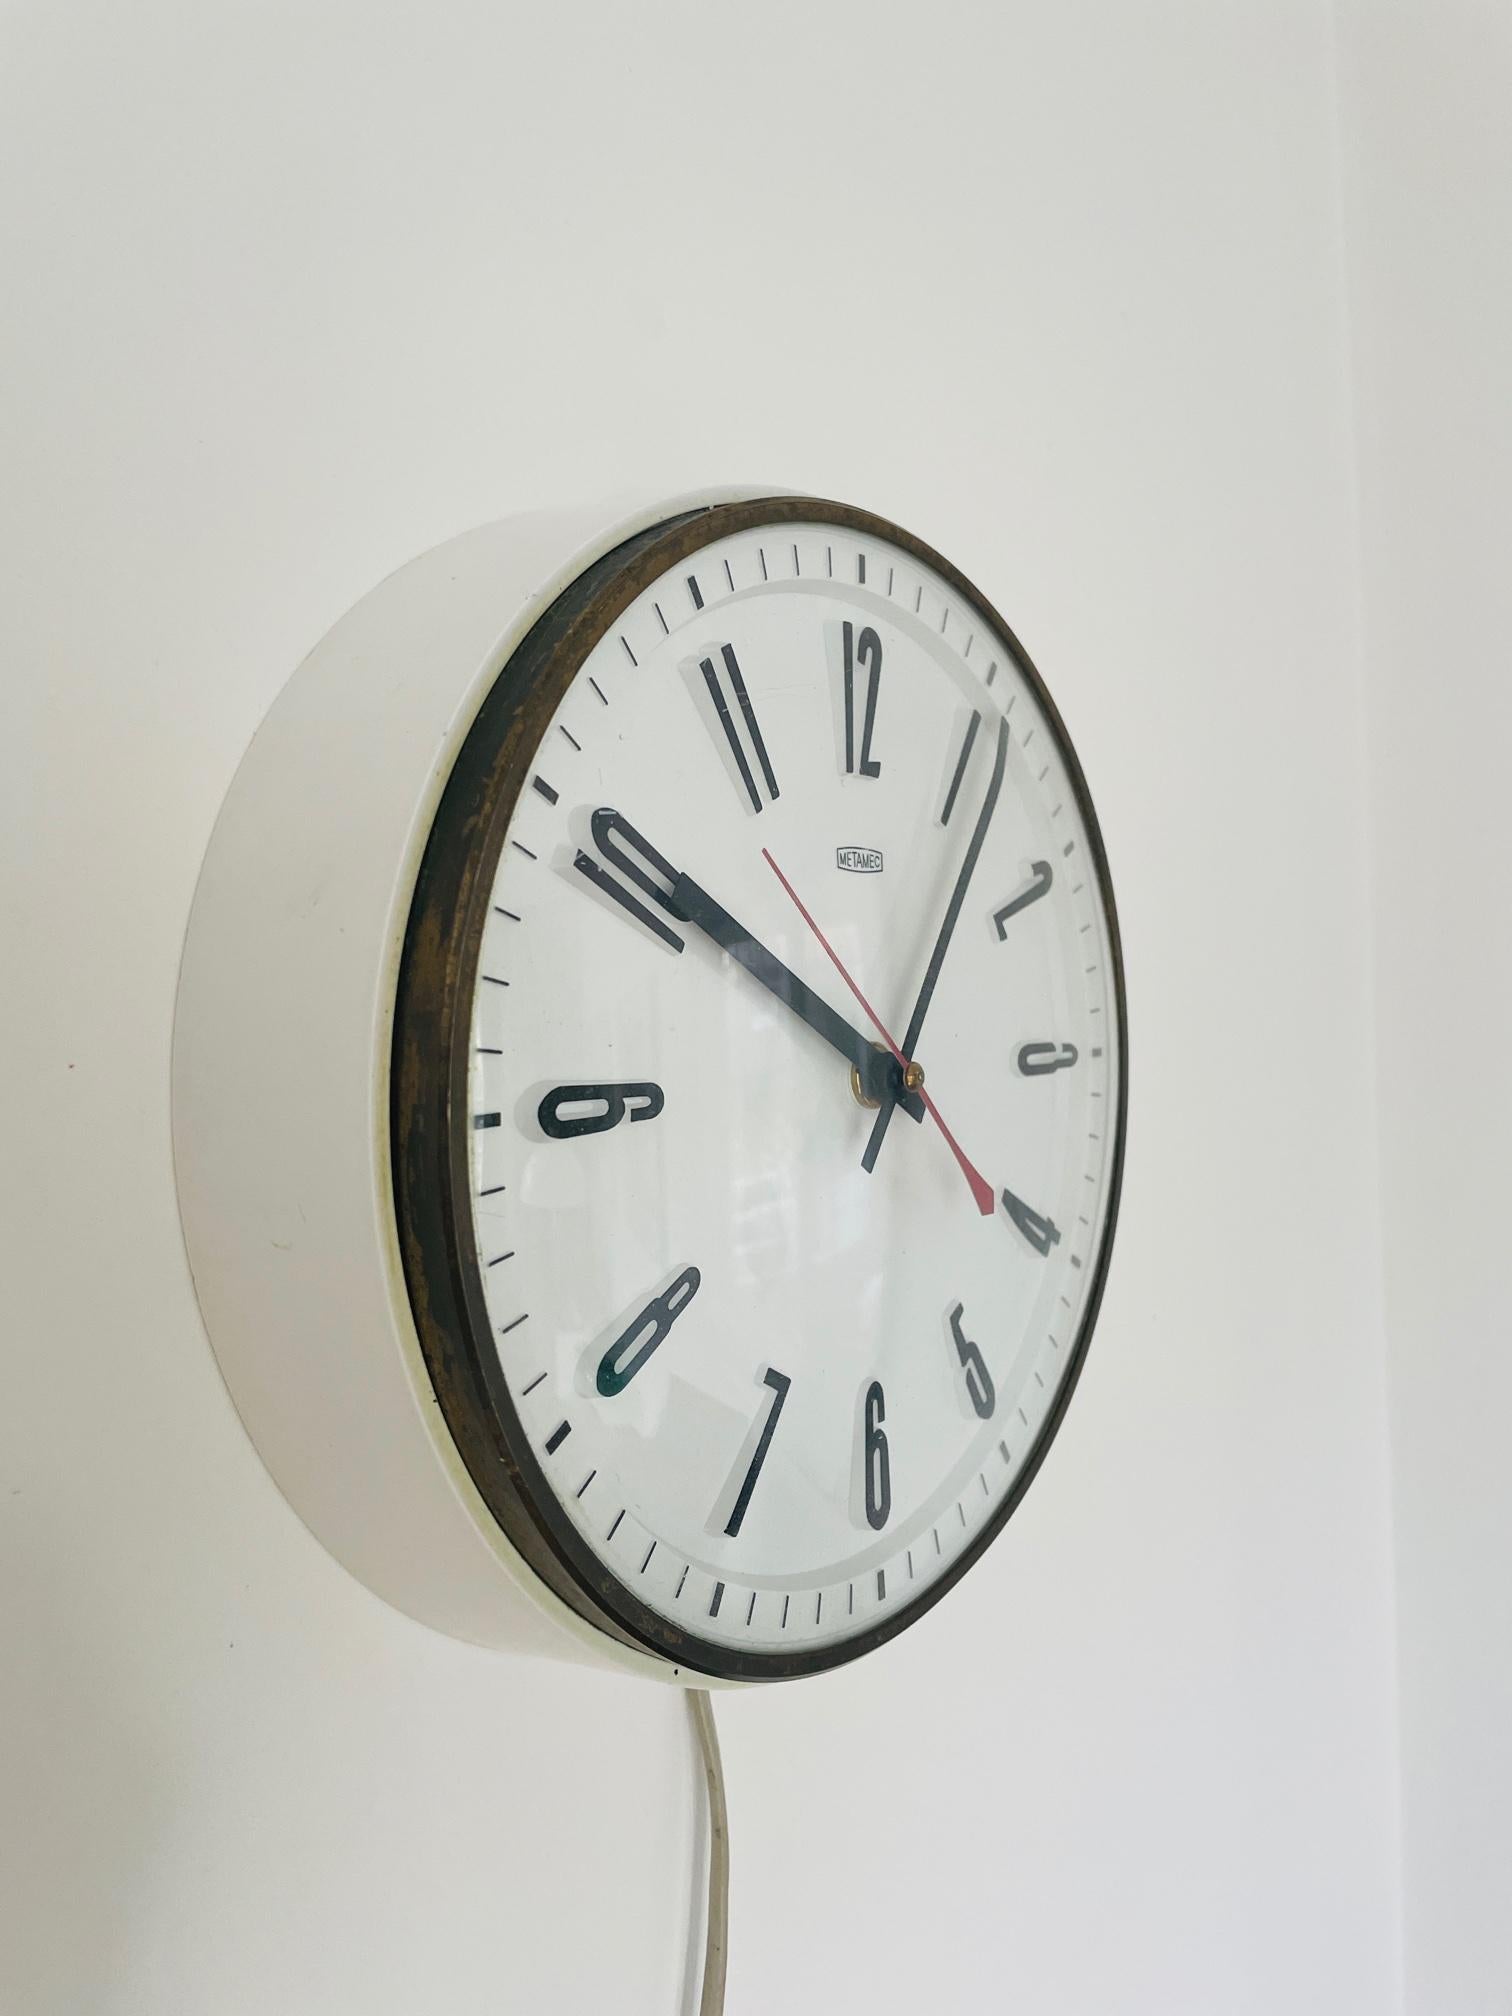 Beautiful electric clock. Runs like ... clockwork. This clock is a must have for everybody who loves a nice design item. In kitchen, office, livingroom, bar, restaurant, shop. Feels at home in every surrounding.

The clock is in real good shape.